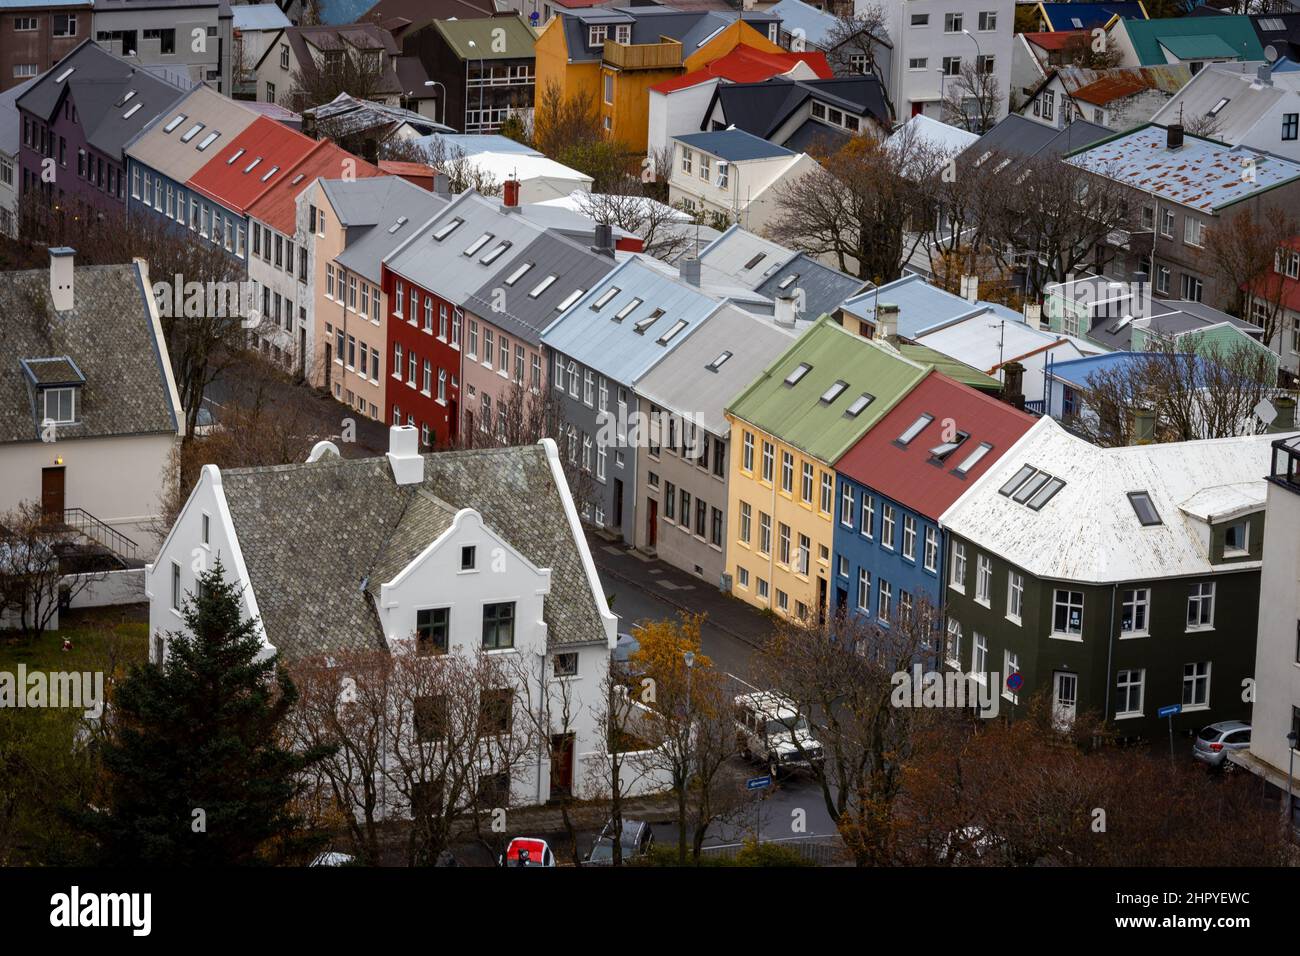 Panoramic view of Reykjavik, Iceland from the Hallgrimskirkja cathedral Stock Photo